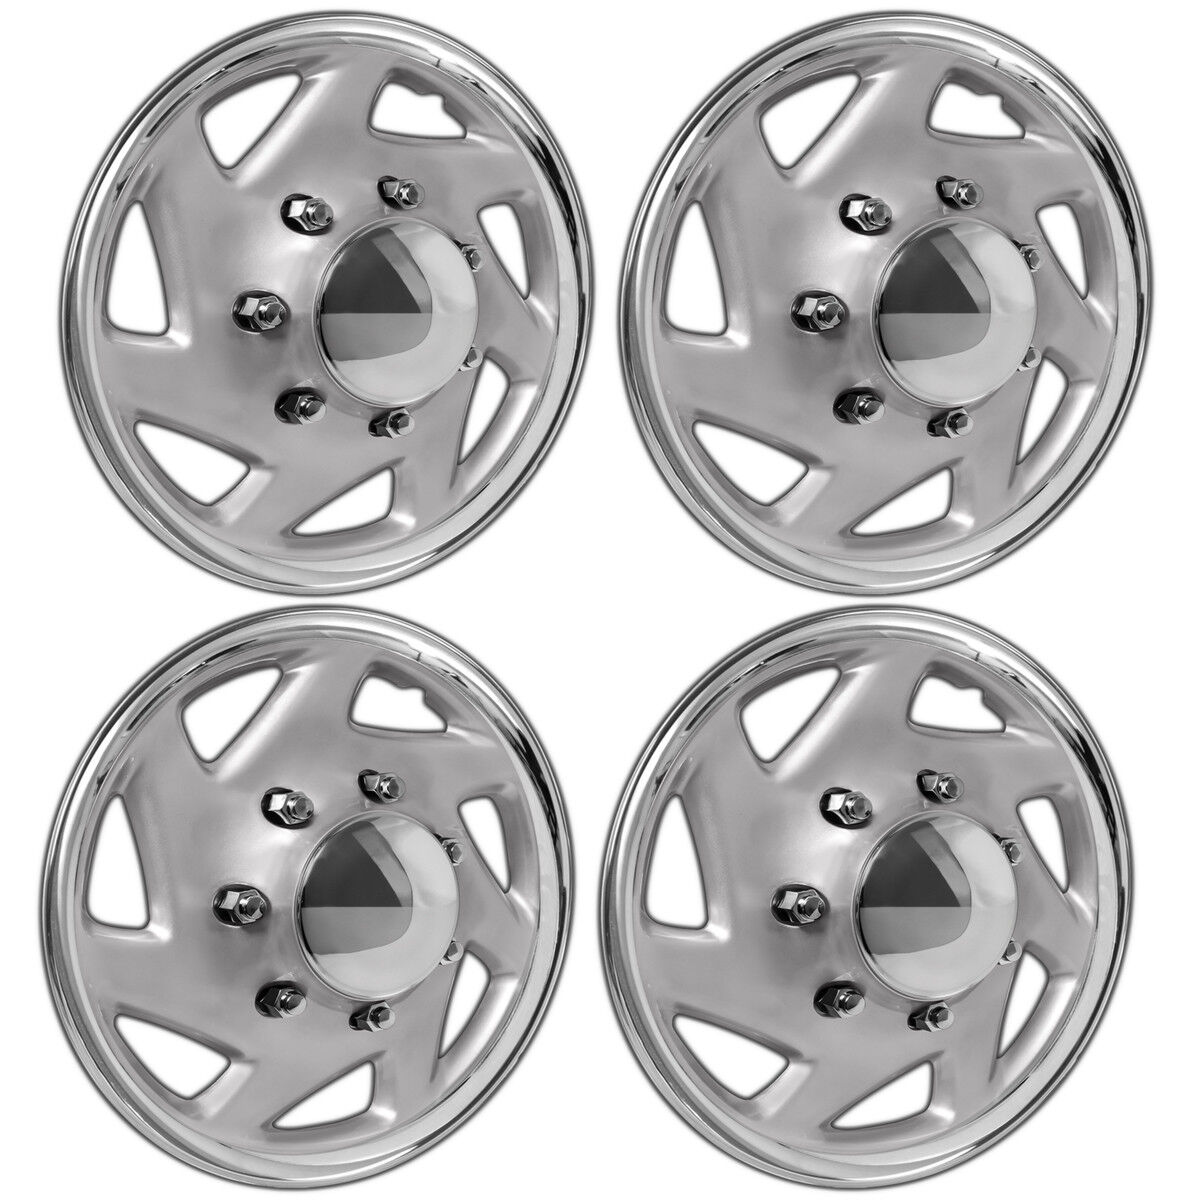 4pc Hubcaps Fits Ford Truck Van For 16